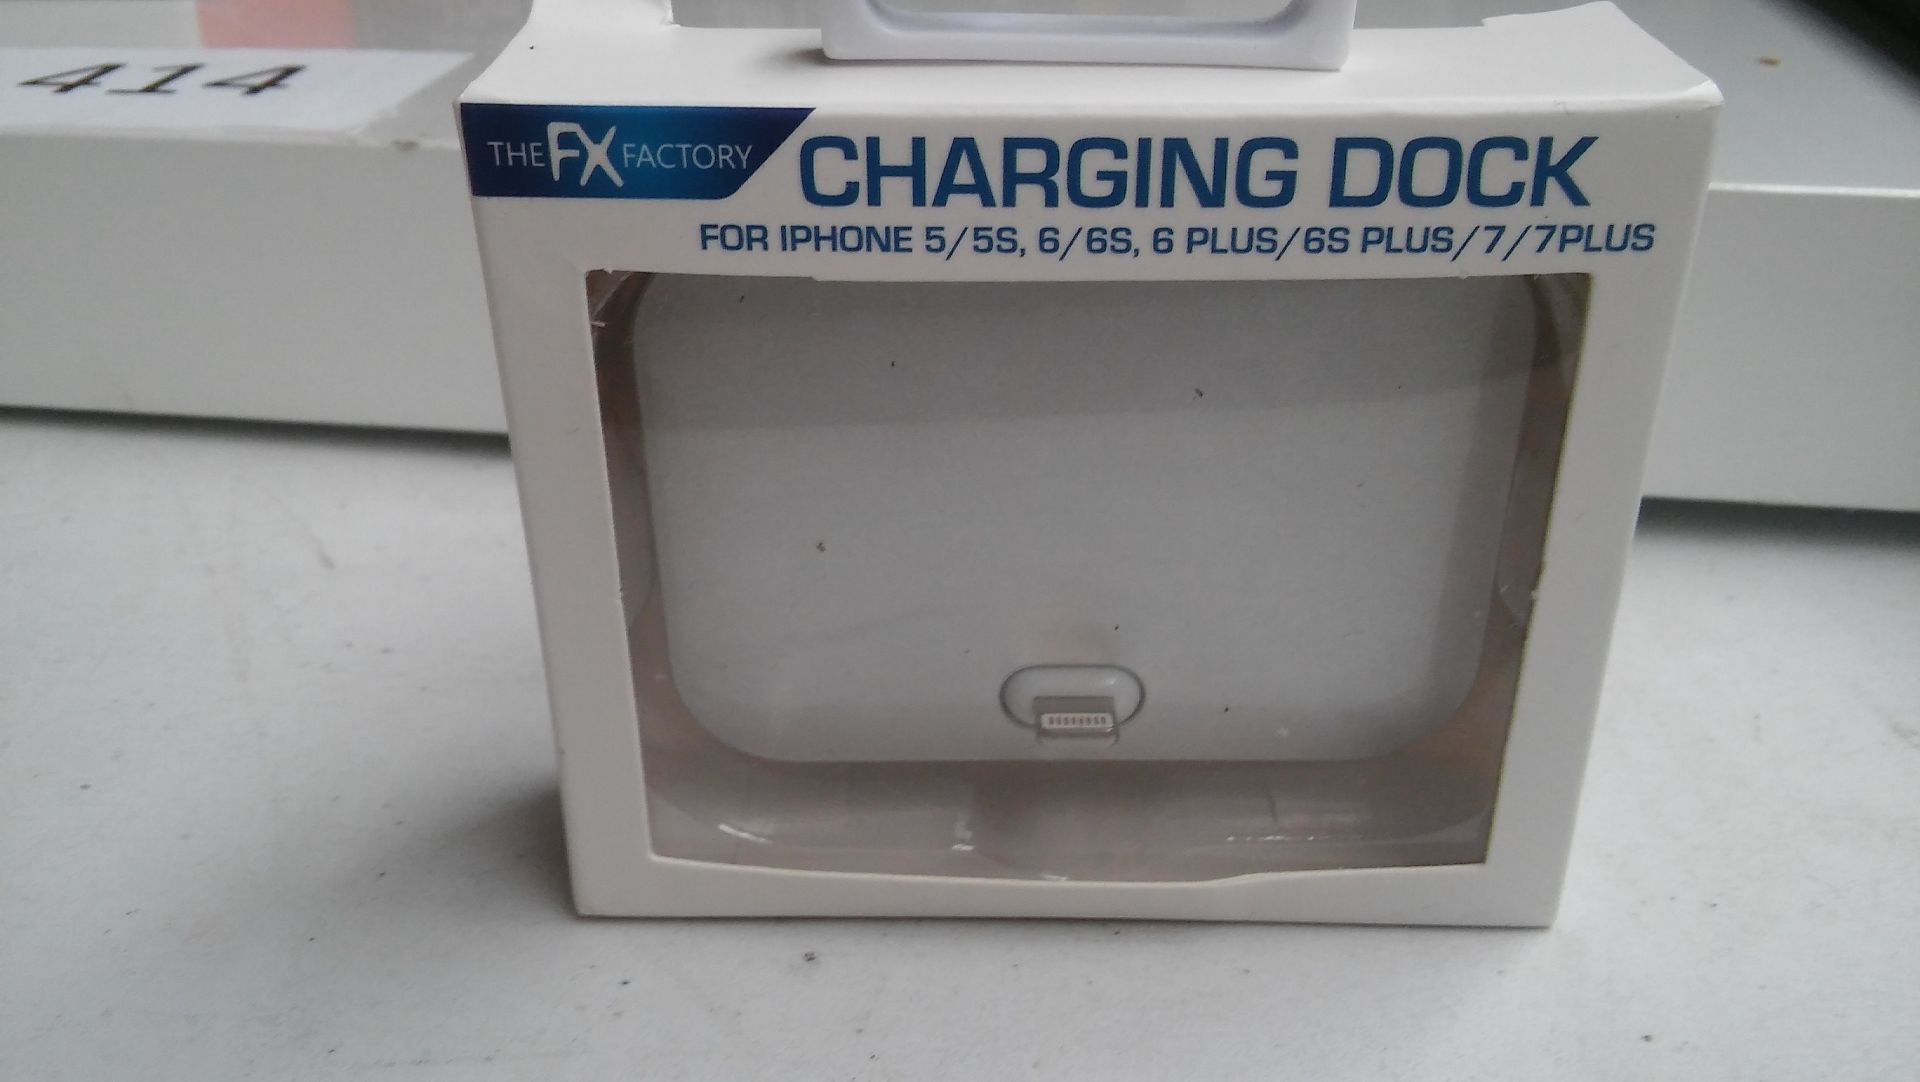 Charging dock for iPhone 5/5S 6/6s 6plus/6S plus 7/7 plus. New.